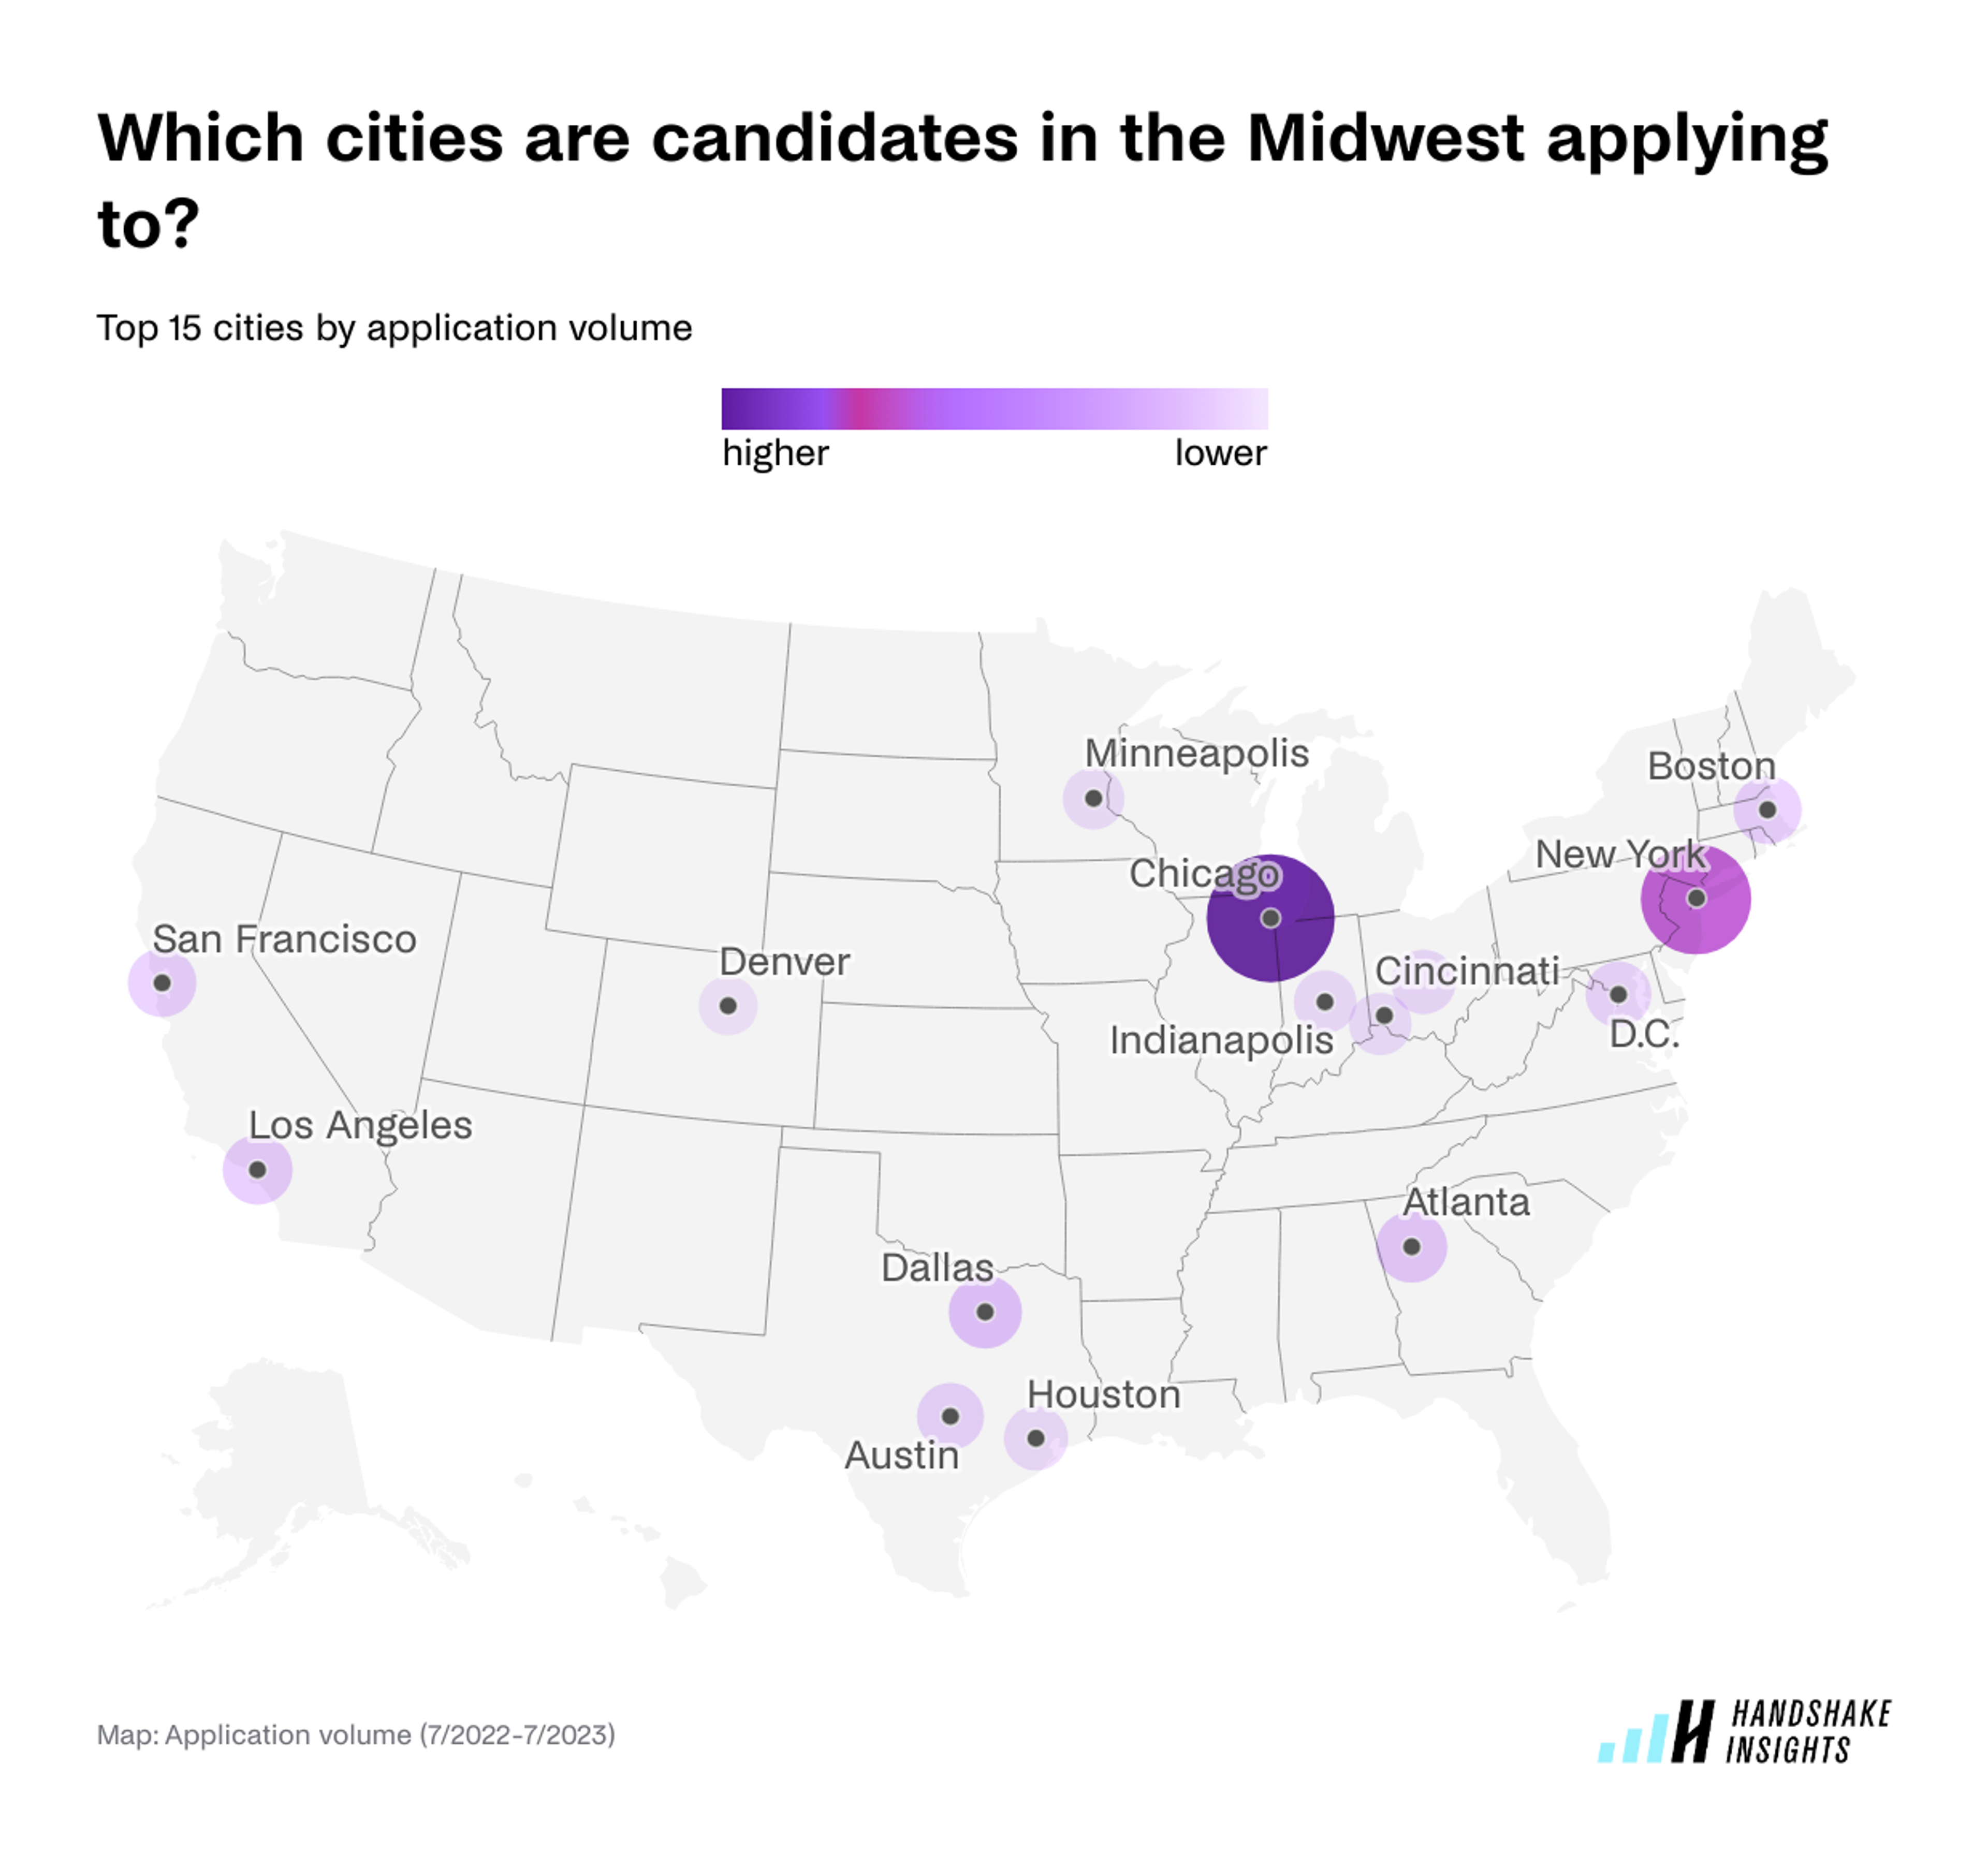 Top 15 cities where college students and recent grads in the Midwest are applying